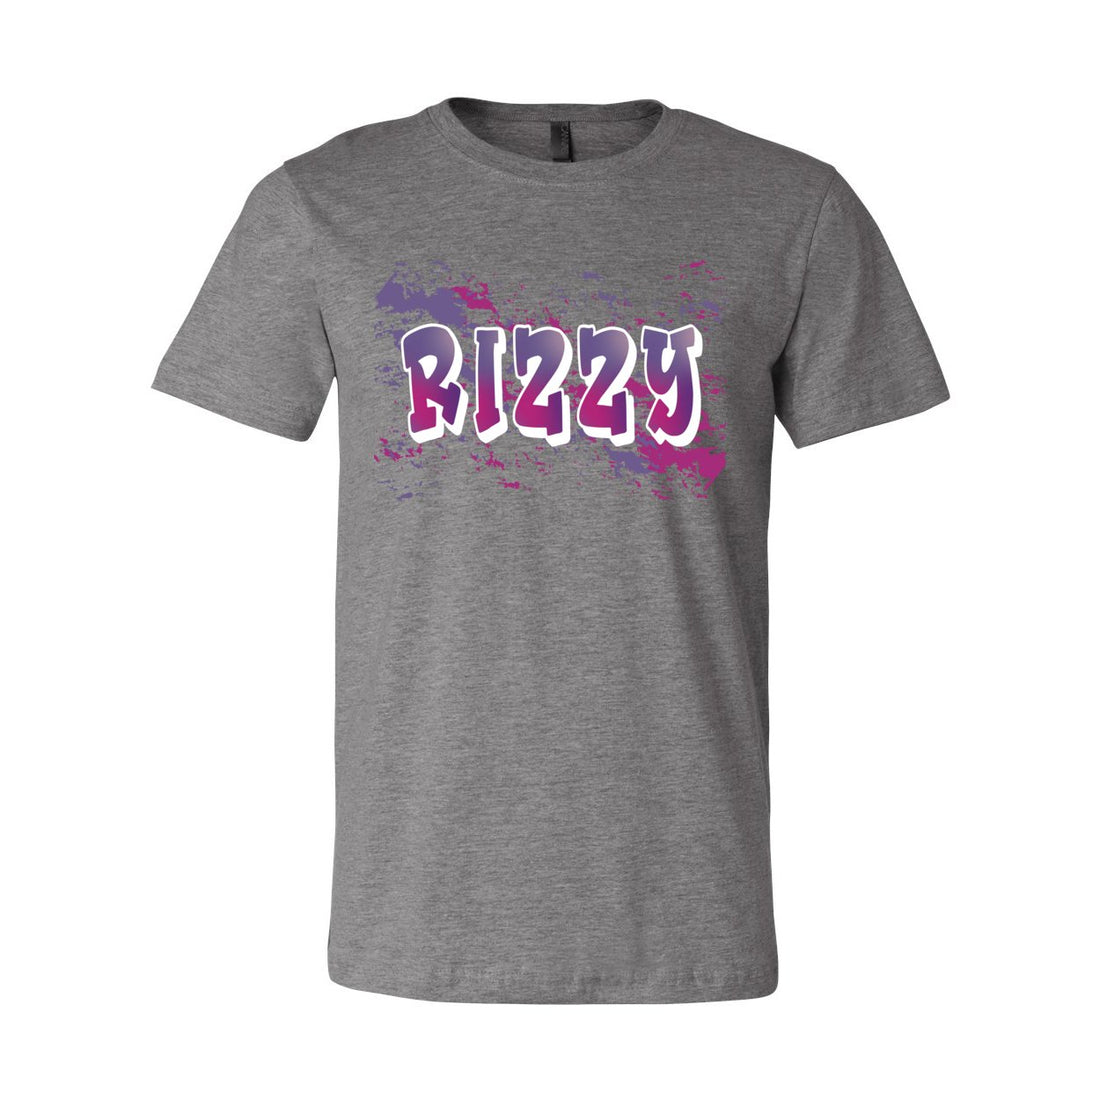 Rizzy Short Sleeve Jersey Tee - T-Shirts - Positively Sassy - Rizzy Short Sleeve Jersey Tee